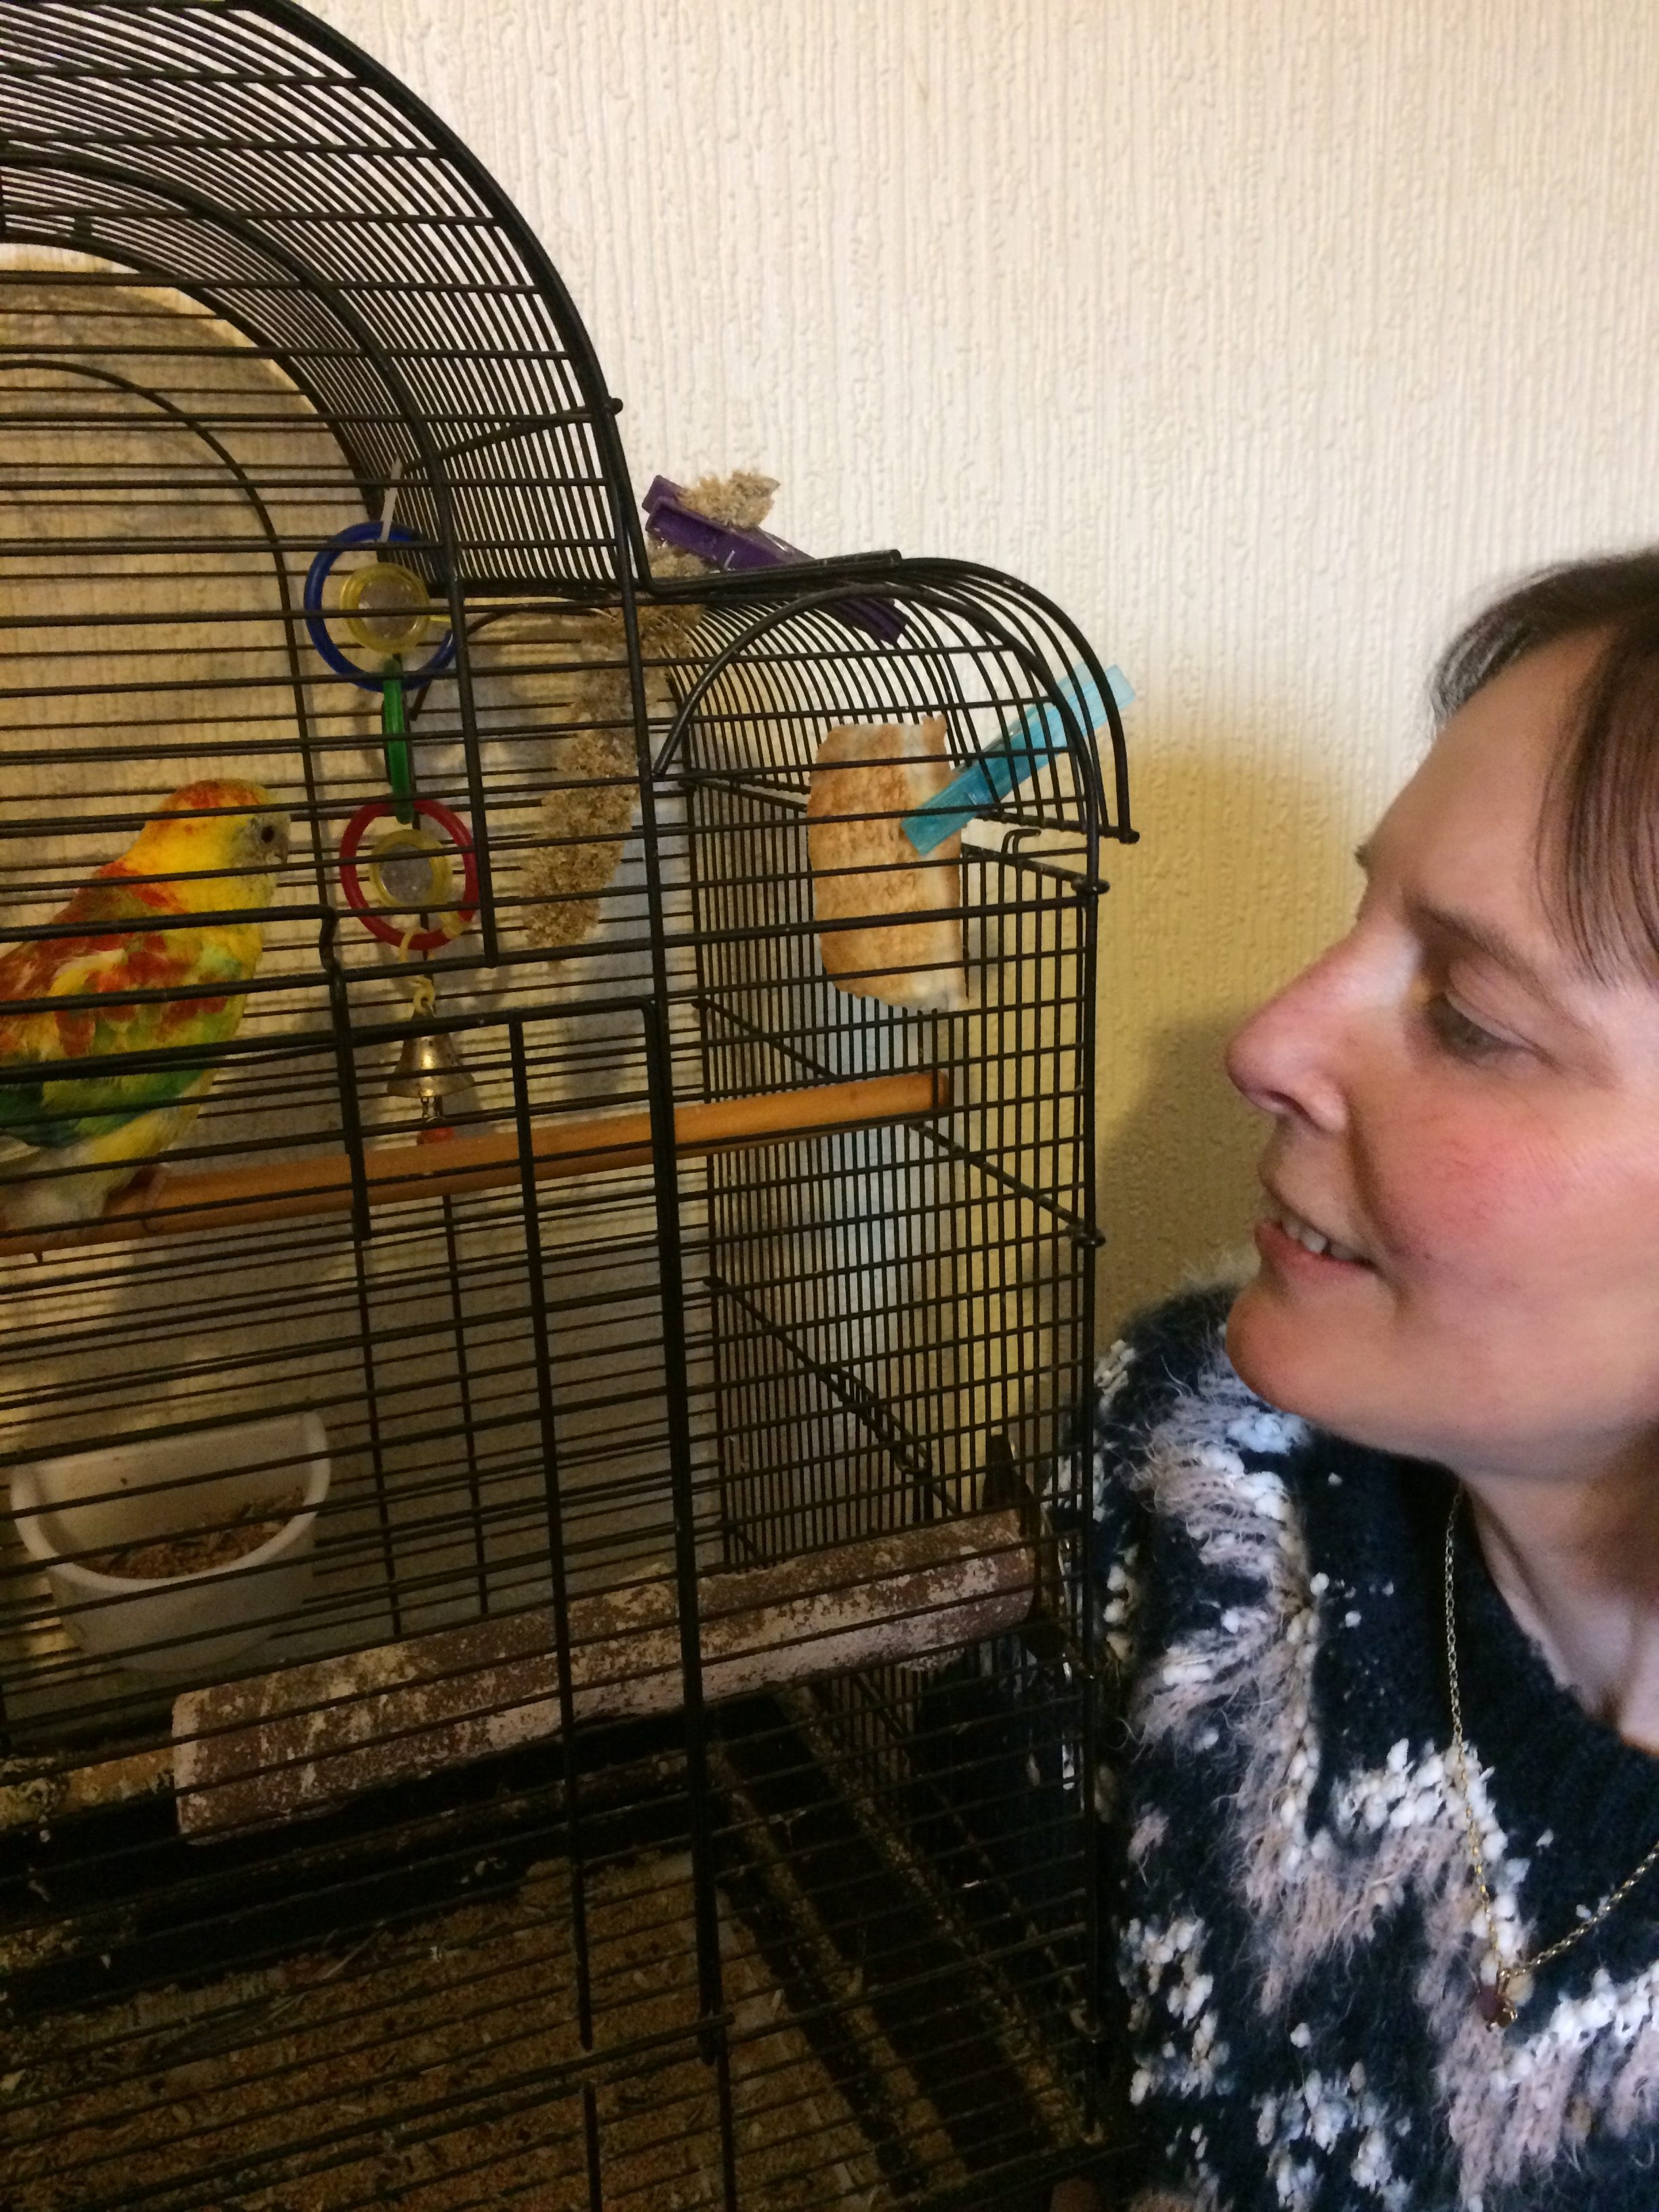 Tracey and her pet bird Angus